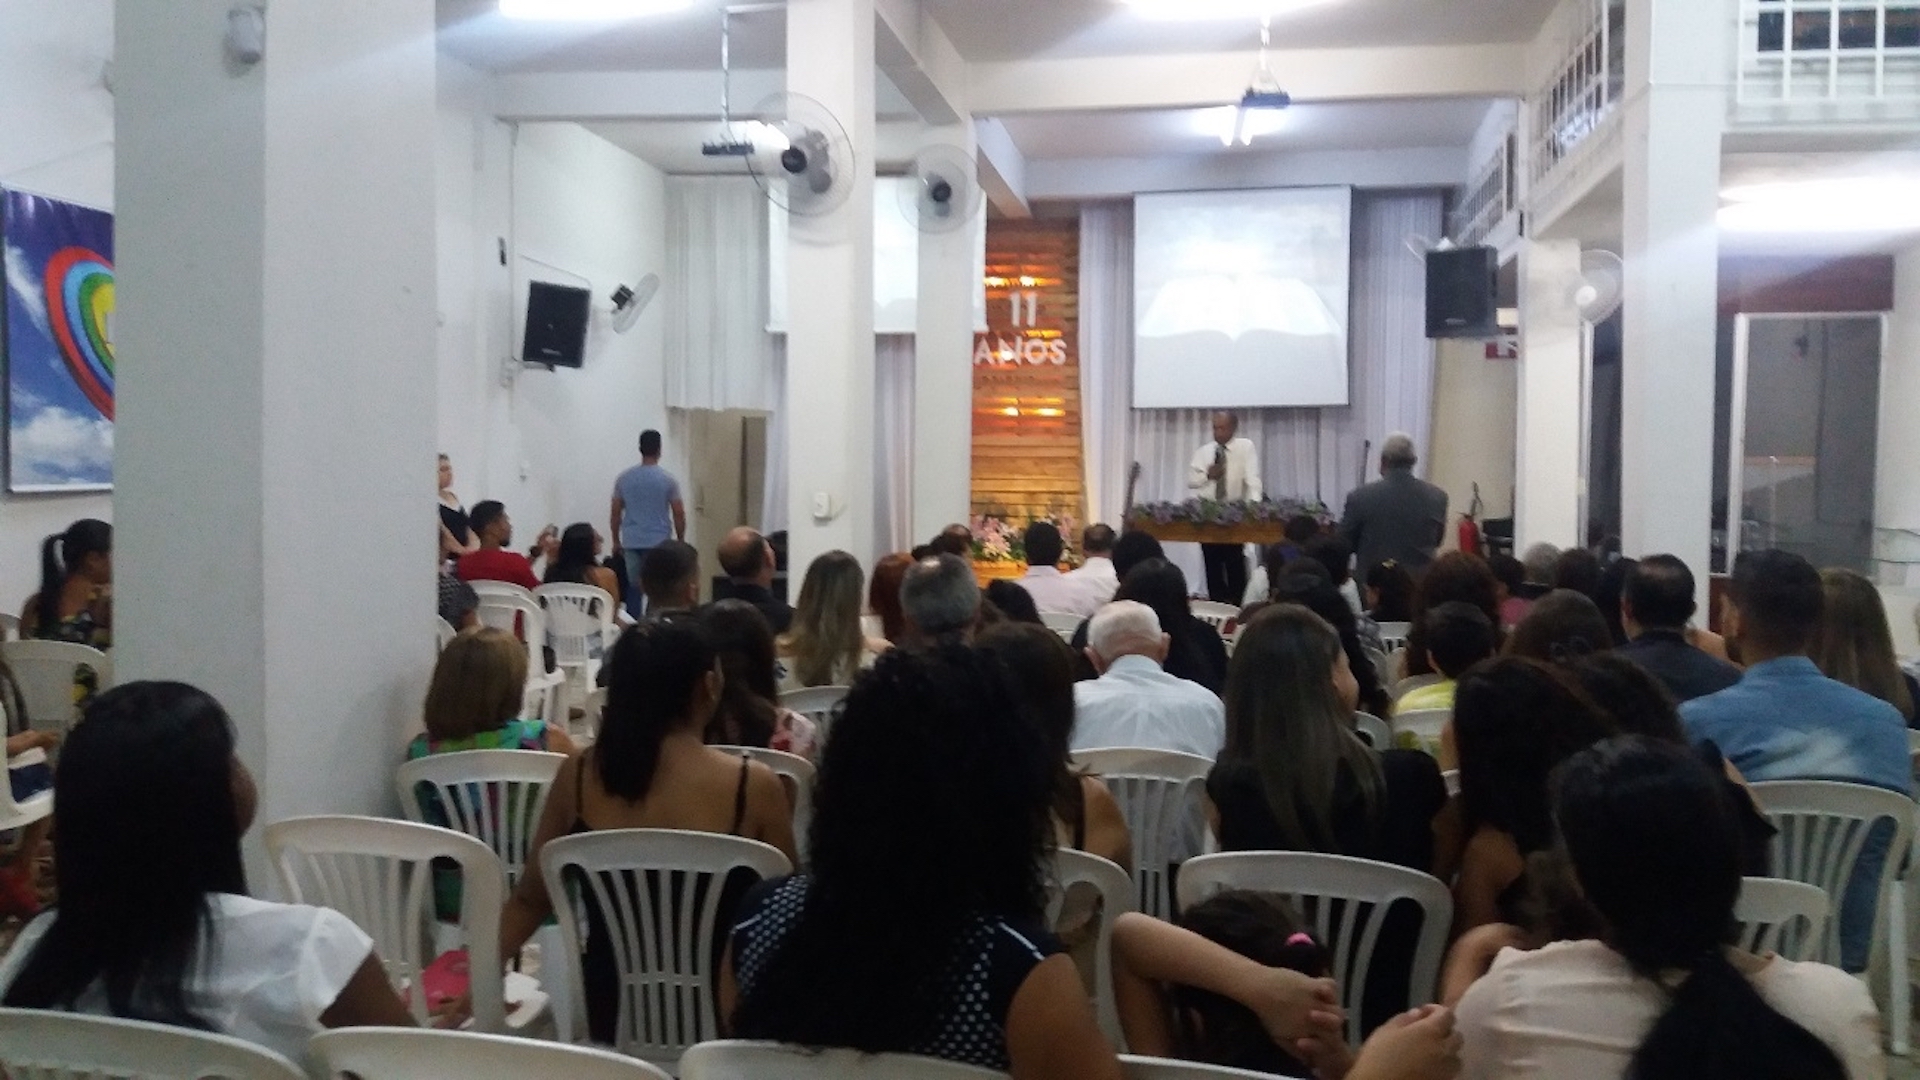 Brazil,Over 14,000 Evangelical churches are opened in Brazil every year.